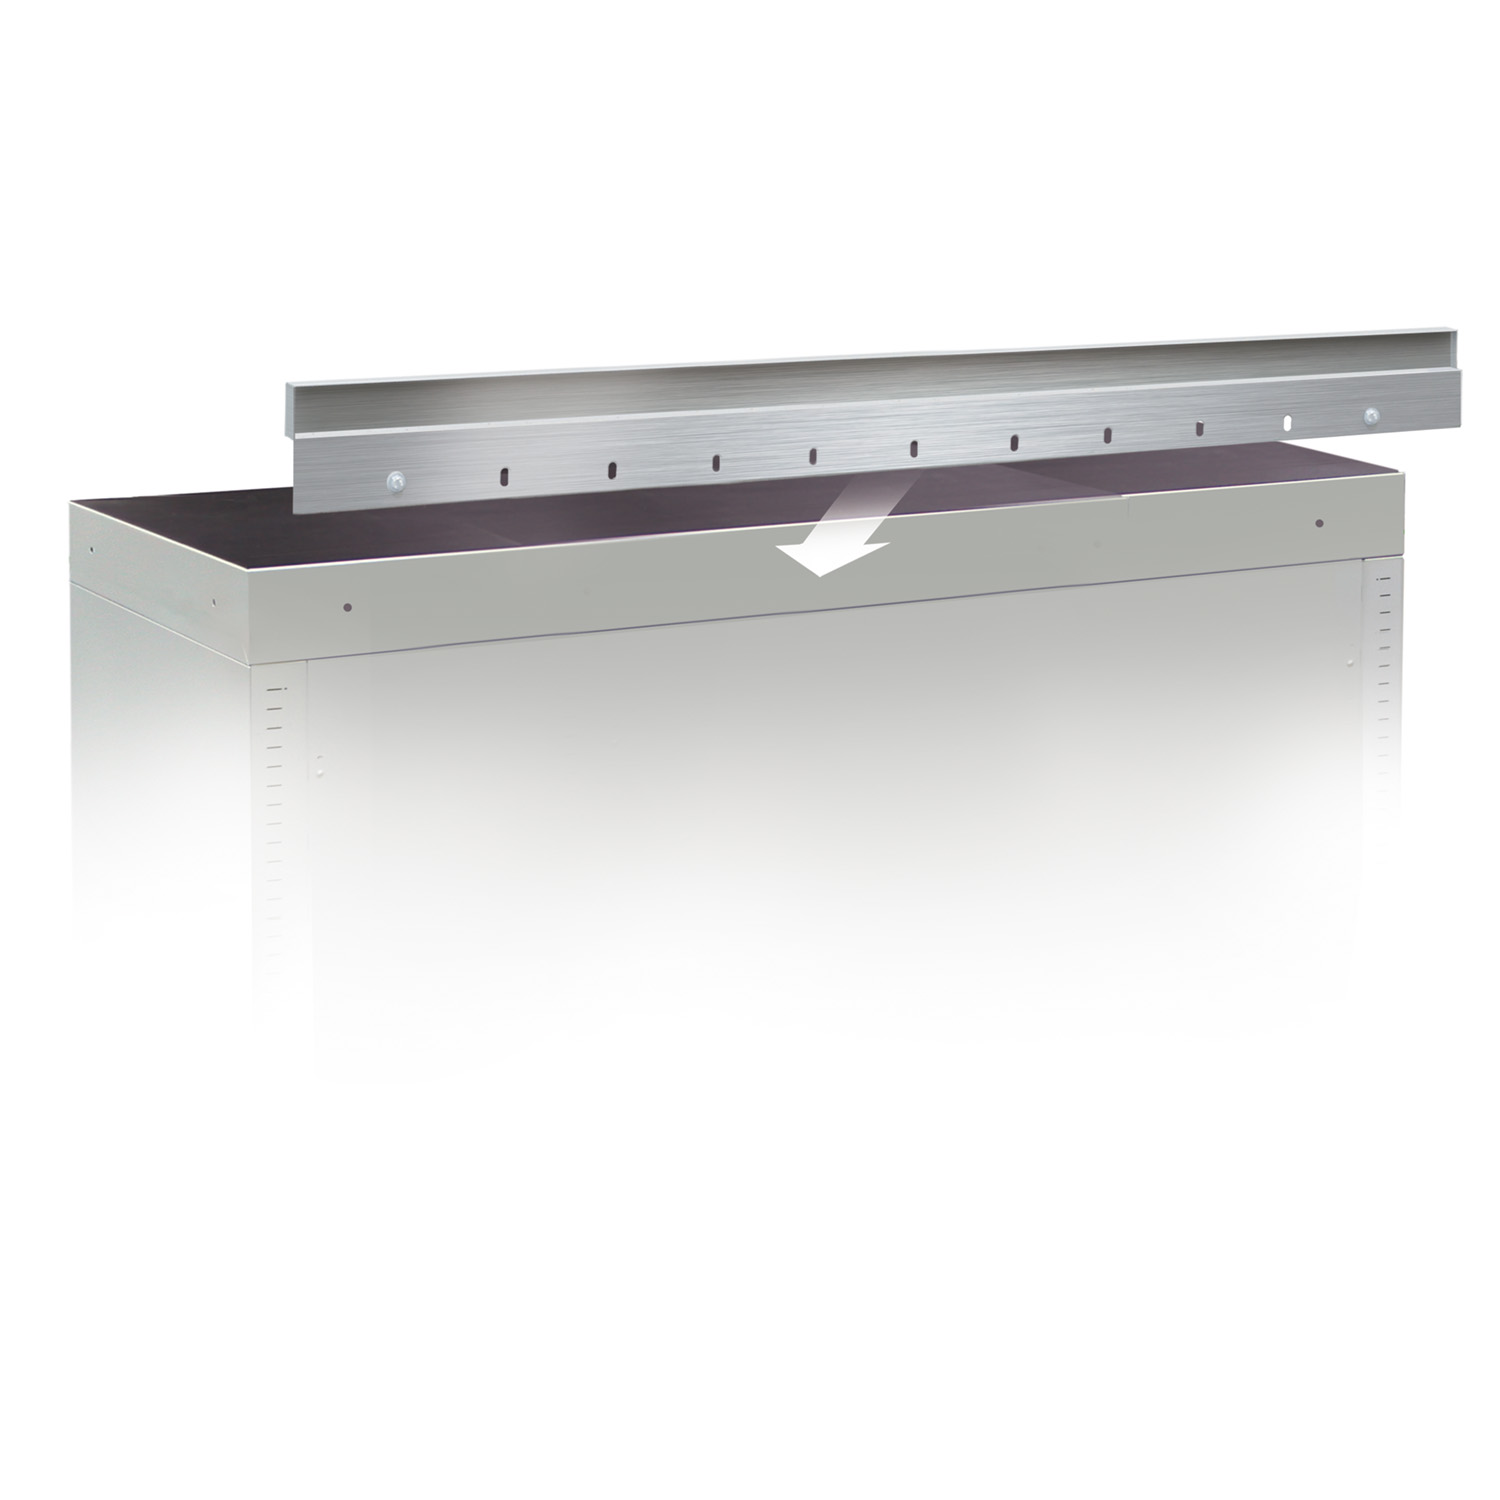 Stainless steel up-stand (50mm x 1200mm)